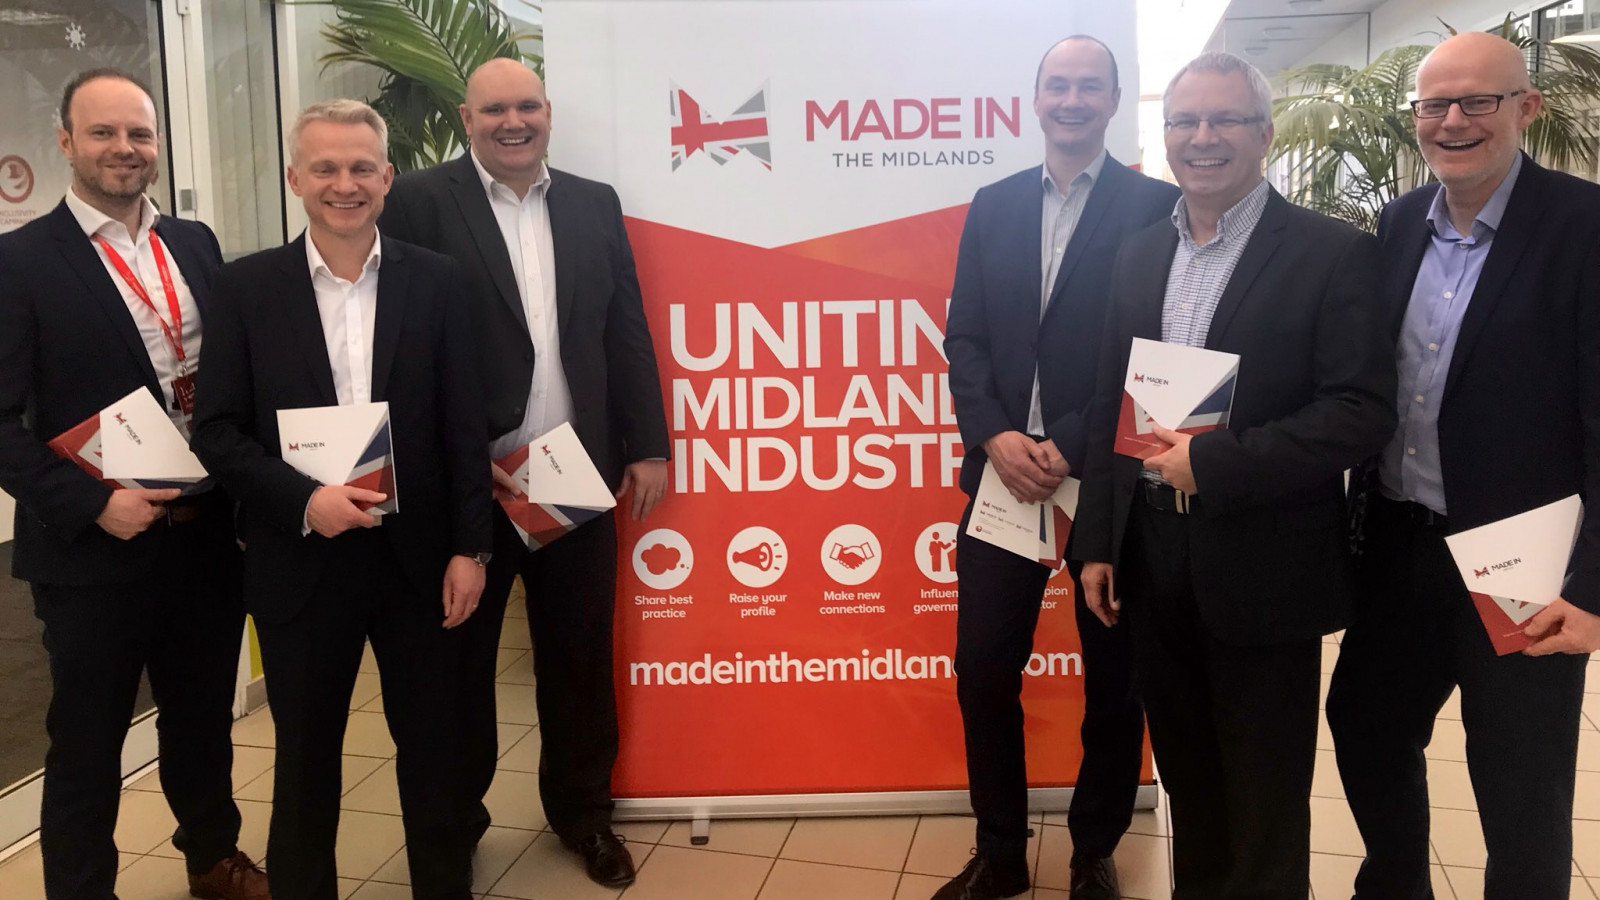 Made in the Midlands Faithful+Gould join Made in the Midlands as a